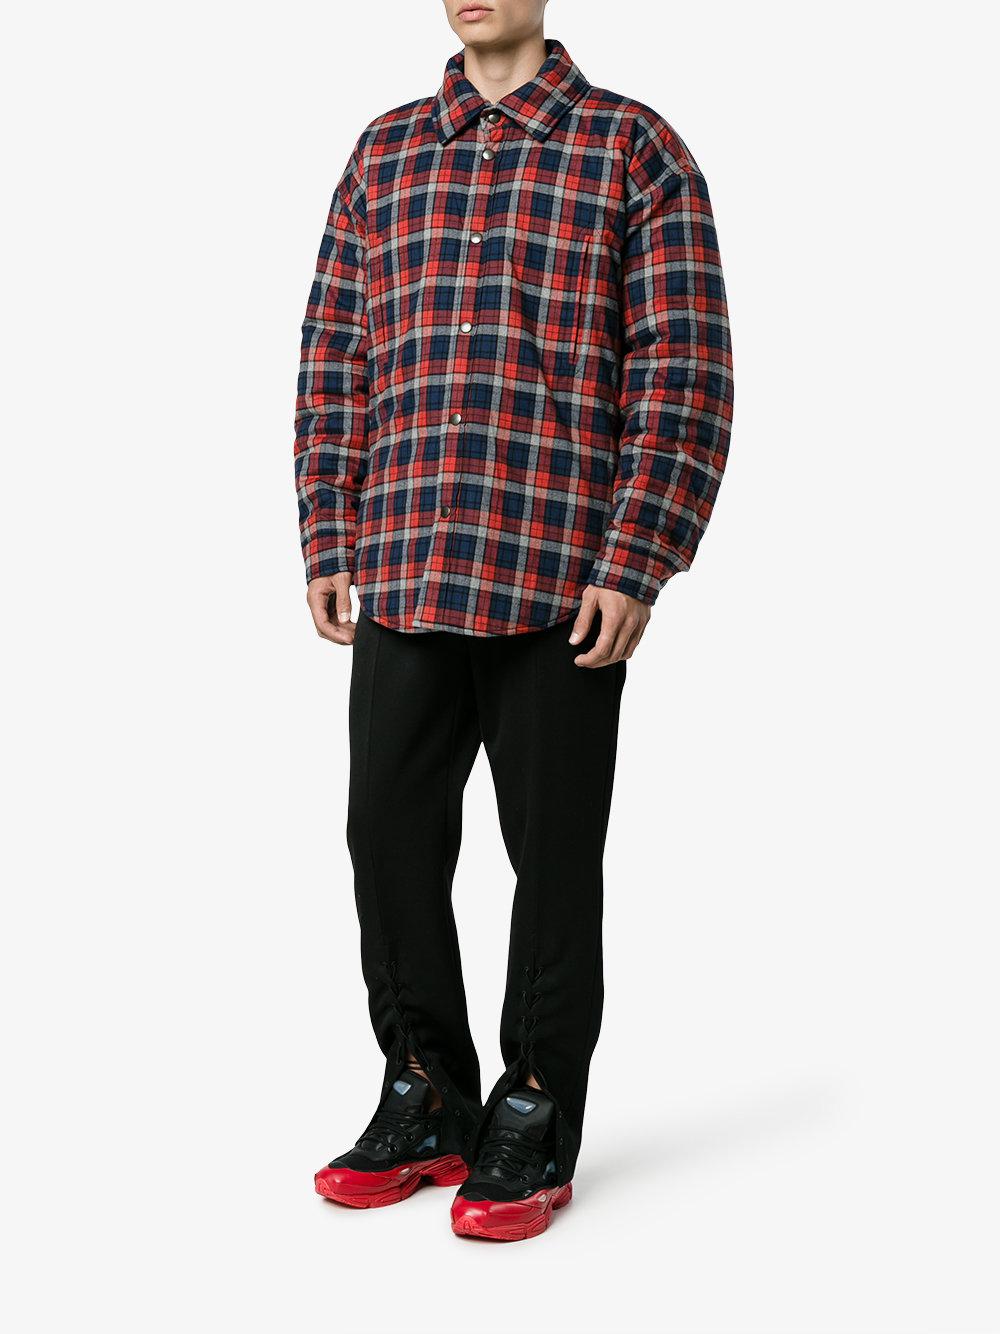 Balenciaga Cotton Peacoat Overshirt in Red for Men - Lyst